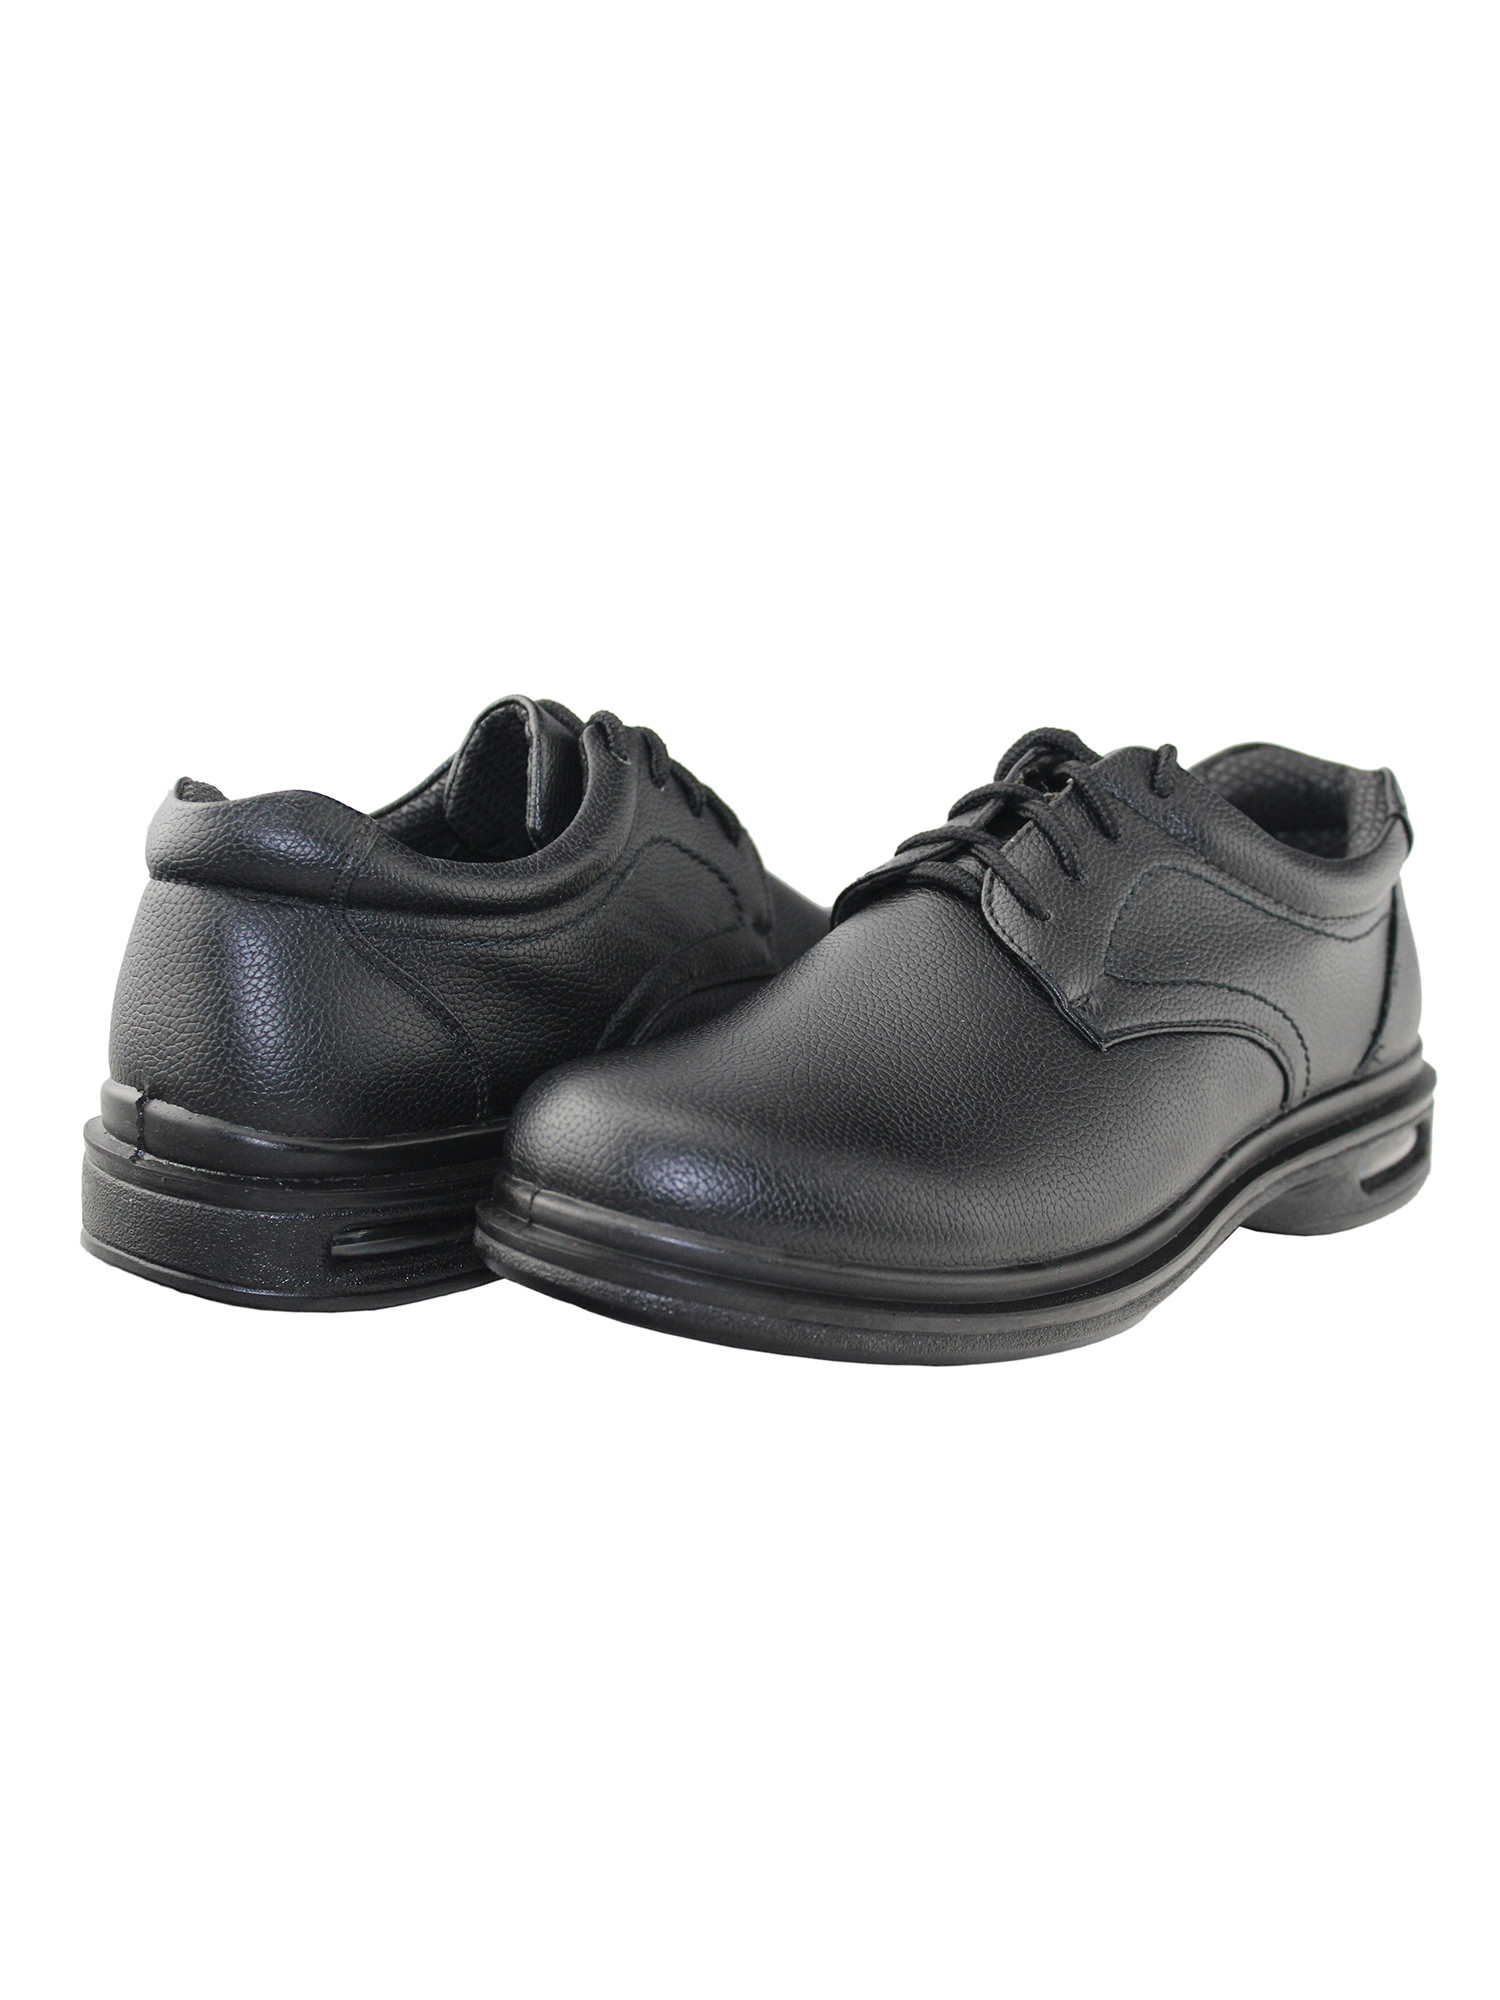 Mens Lightweight Non-Slip And Oil Resistant Shoes Autumn Winter Comfortable Air-Cushioning Casual Shoes - image 1 of 5